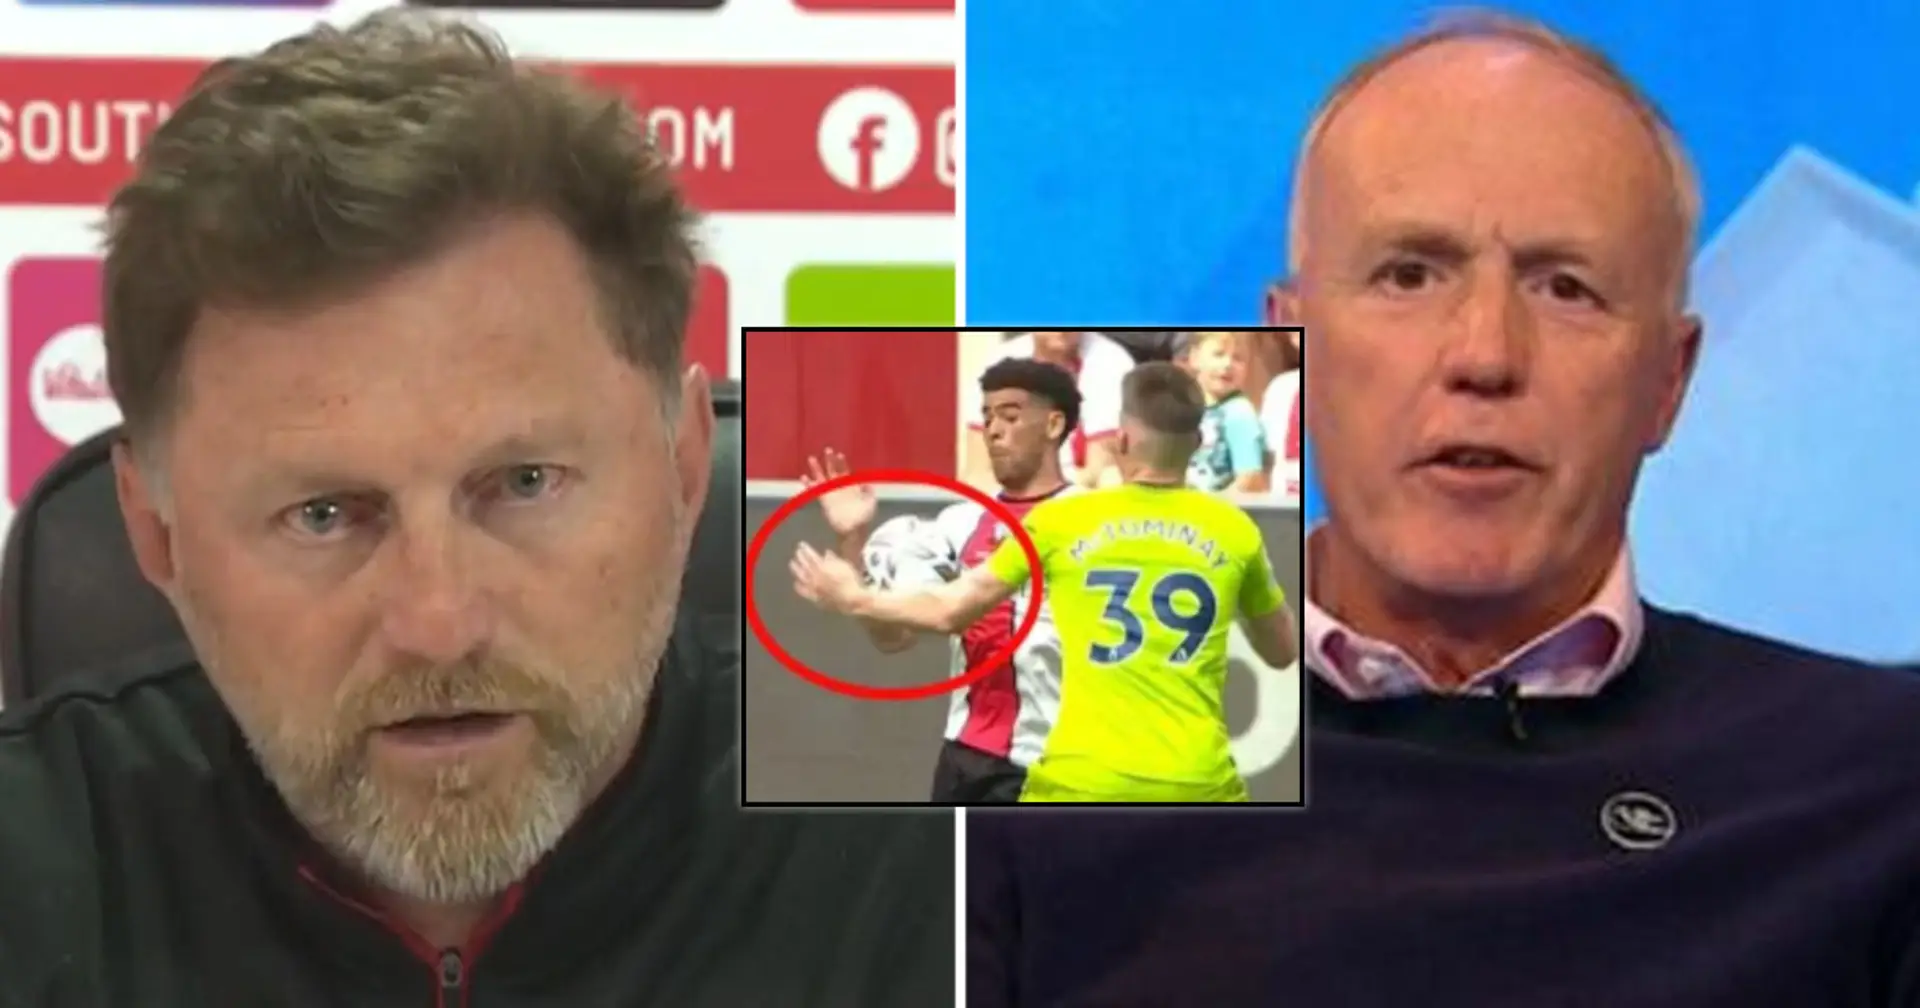 Southampton boss Hasenhuttl claims they should've received penalty for McTominay handball - PL referee explains why they didn't